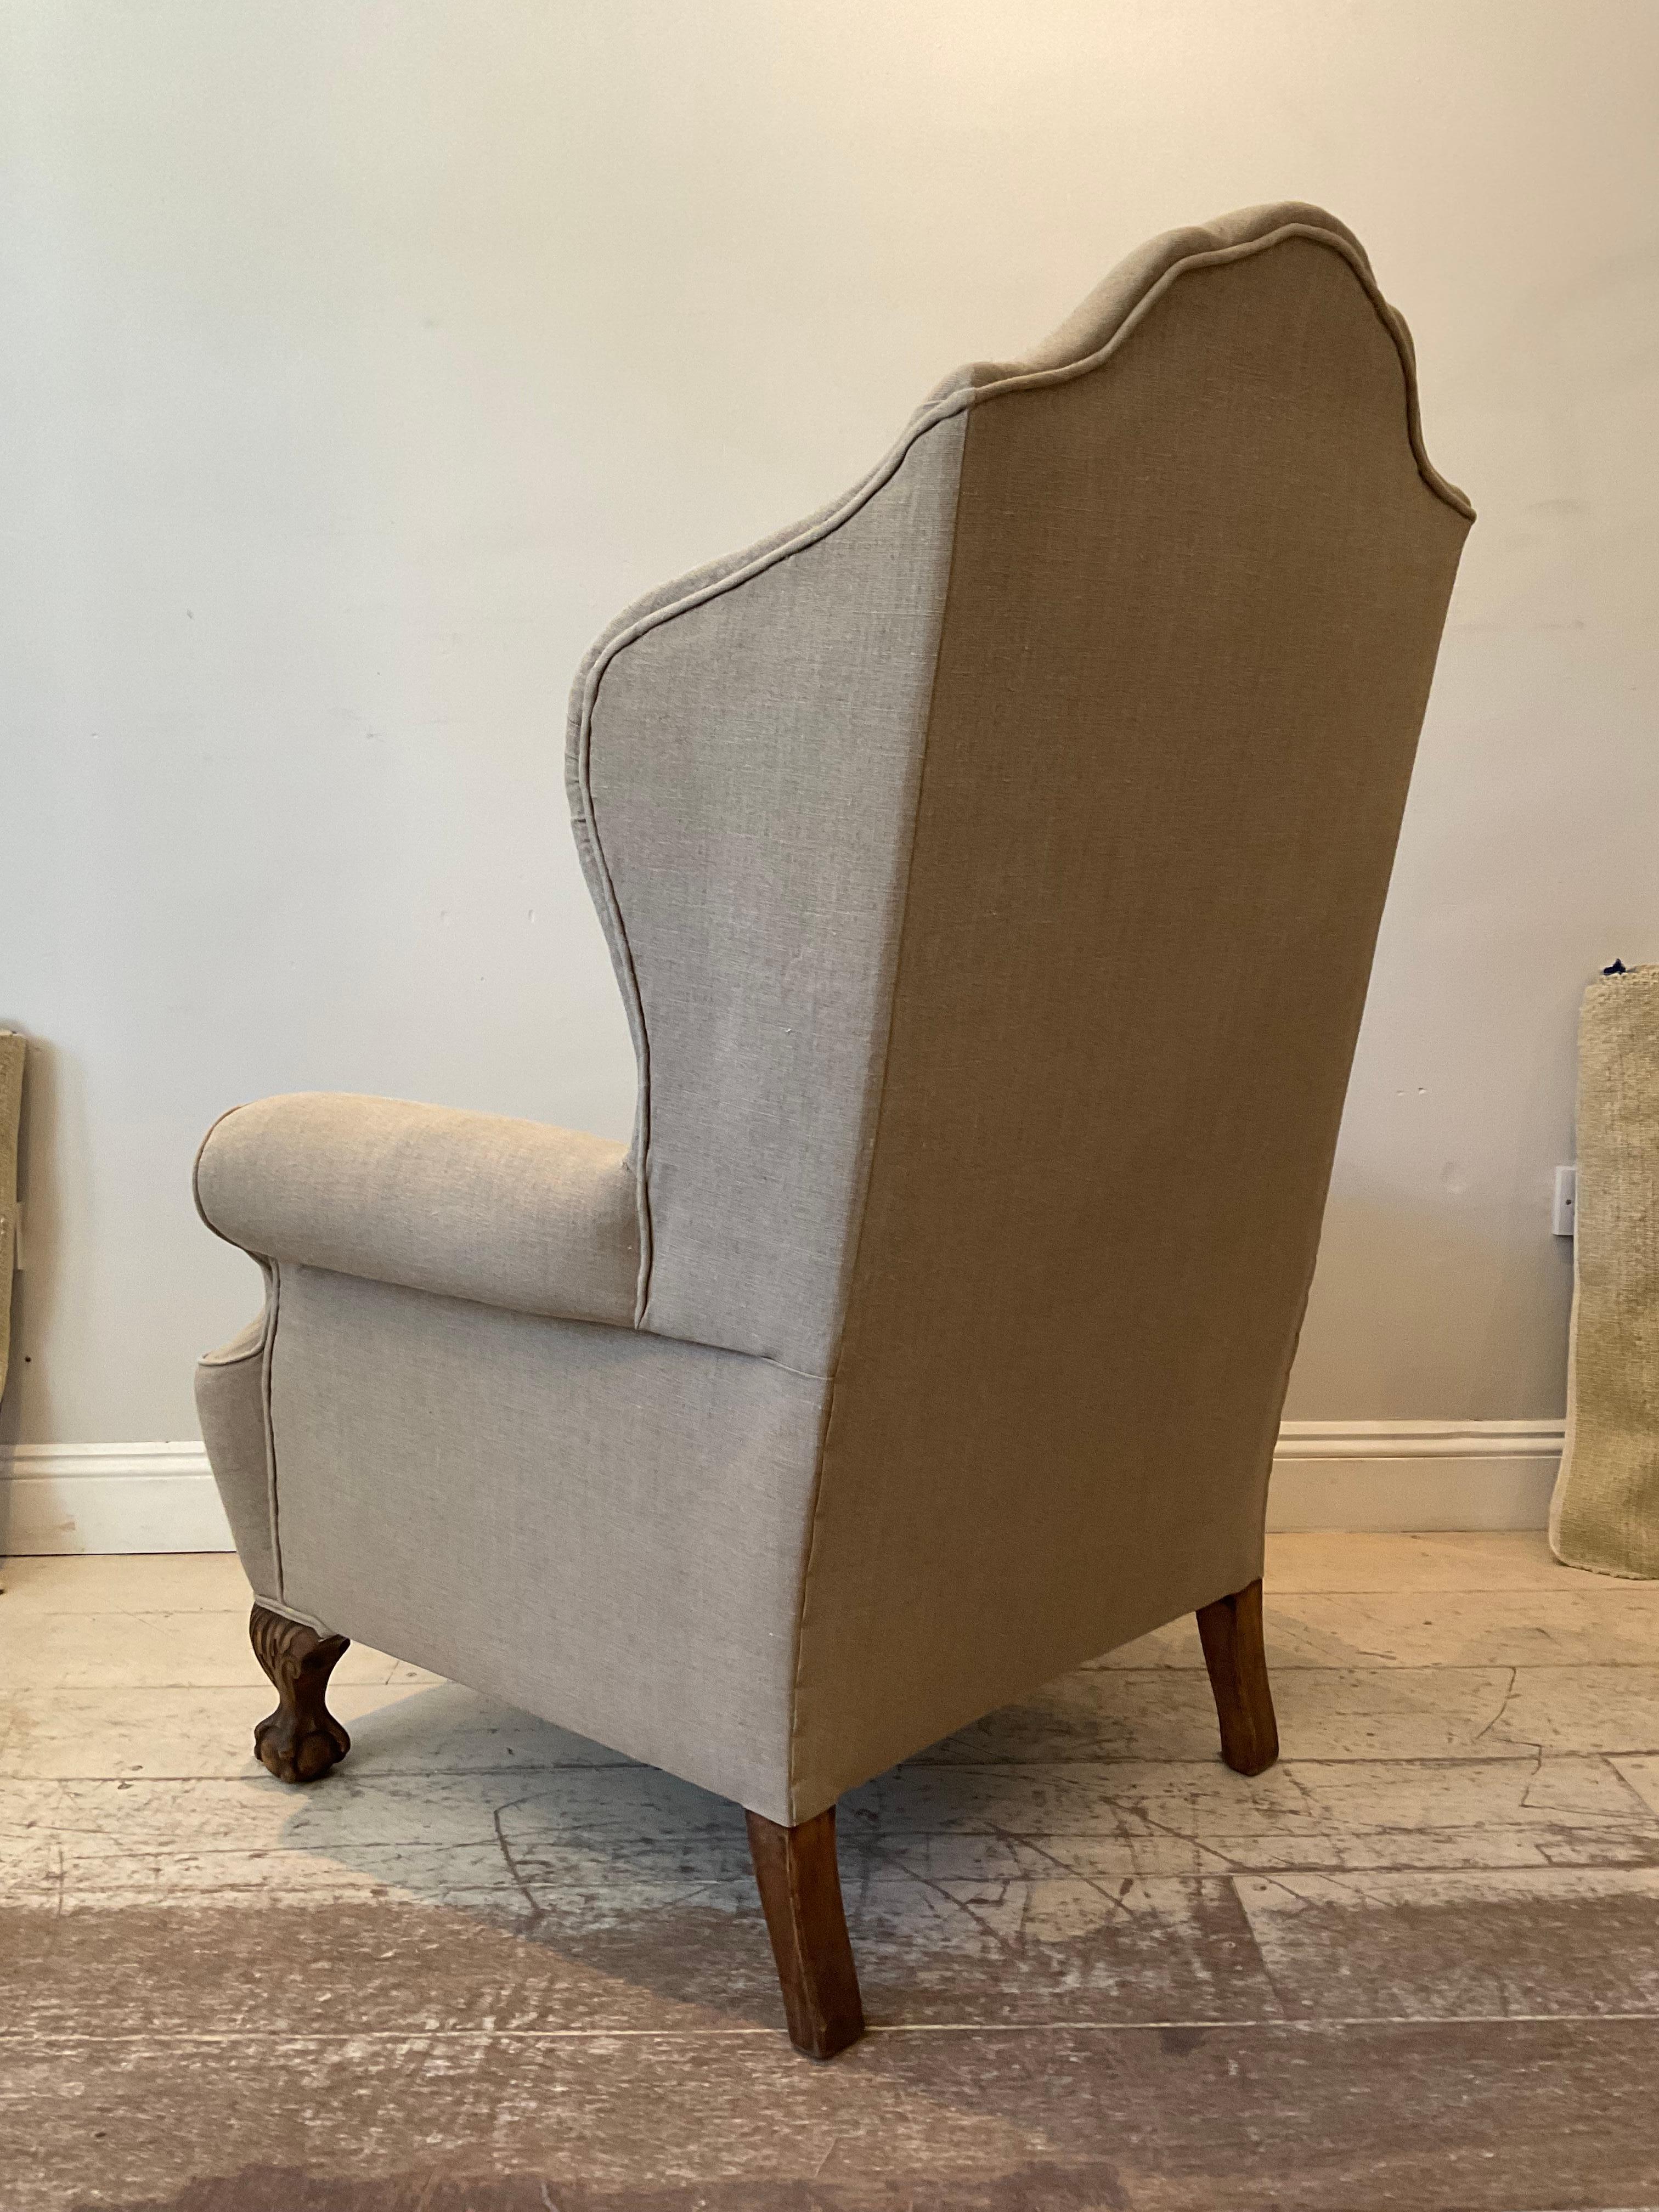 Pair of Large 1920s English Wing Back Chairs Upholstered in Neutral Linen 1